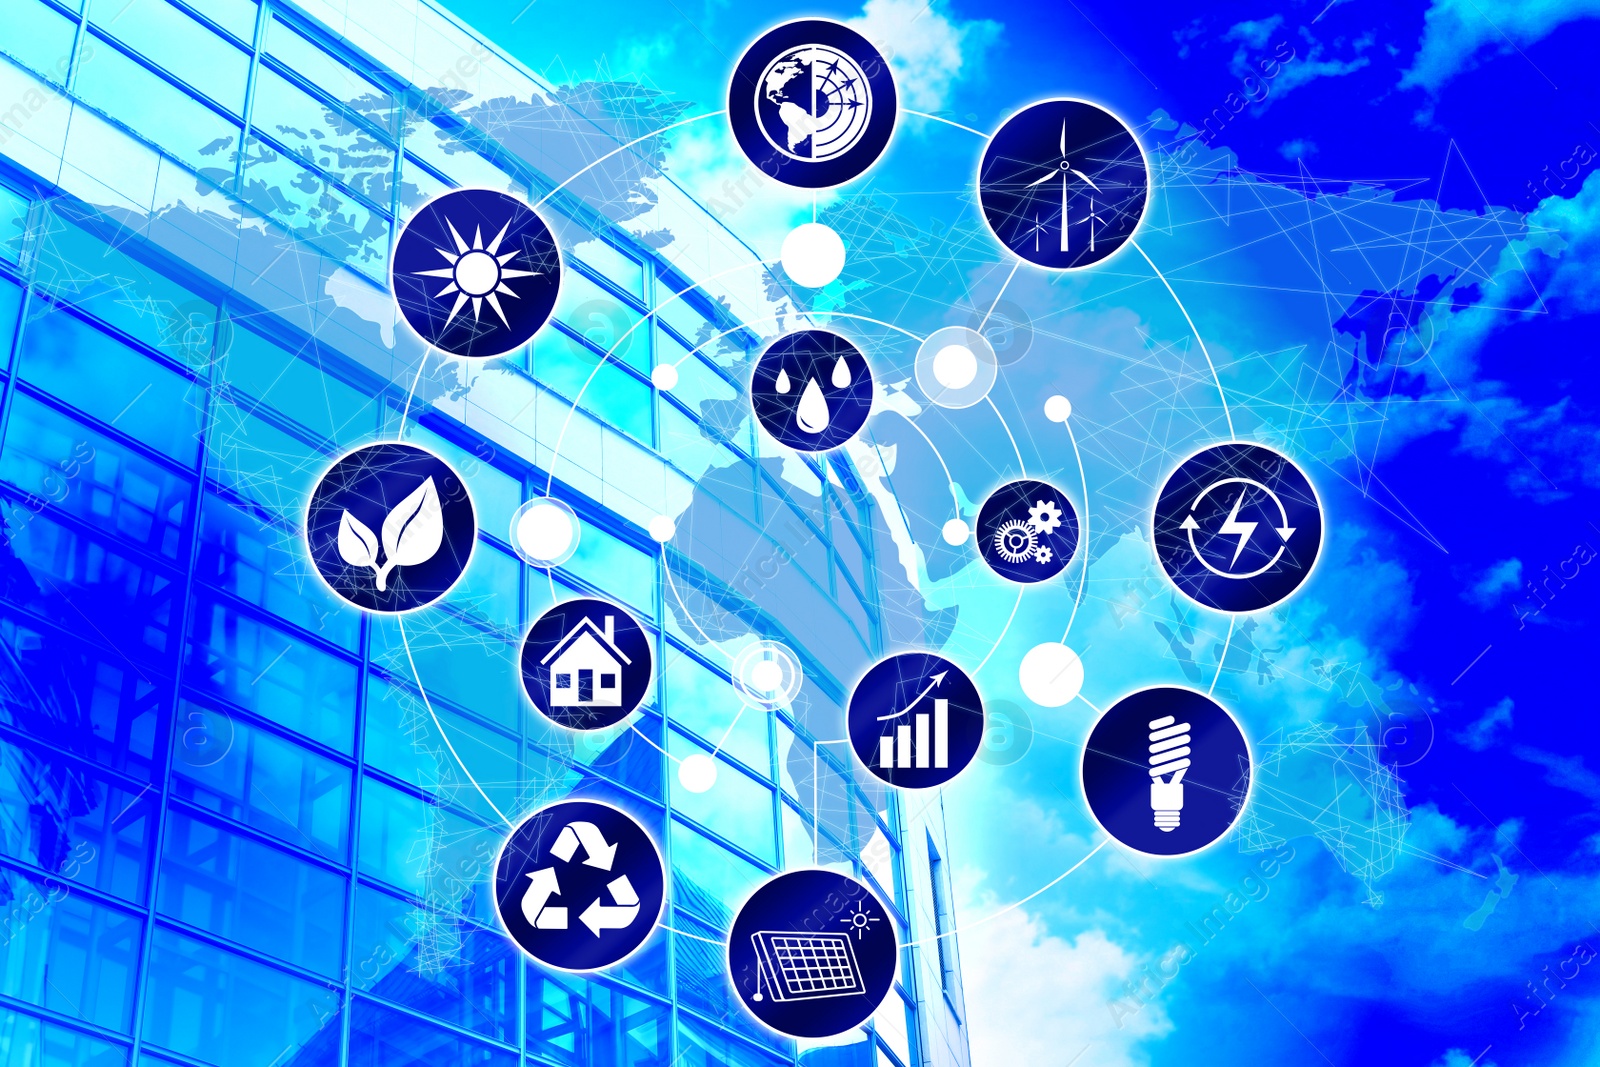 Image of Energy efficiency concept. Scheme with icons, world map and building on background, toned in blue